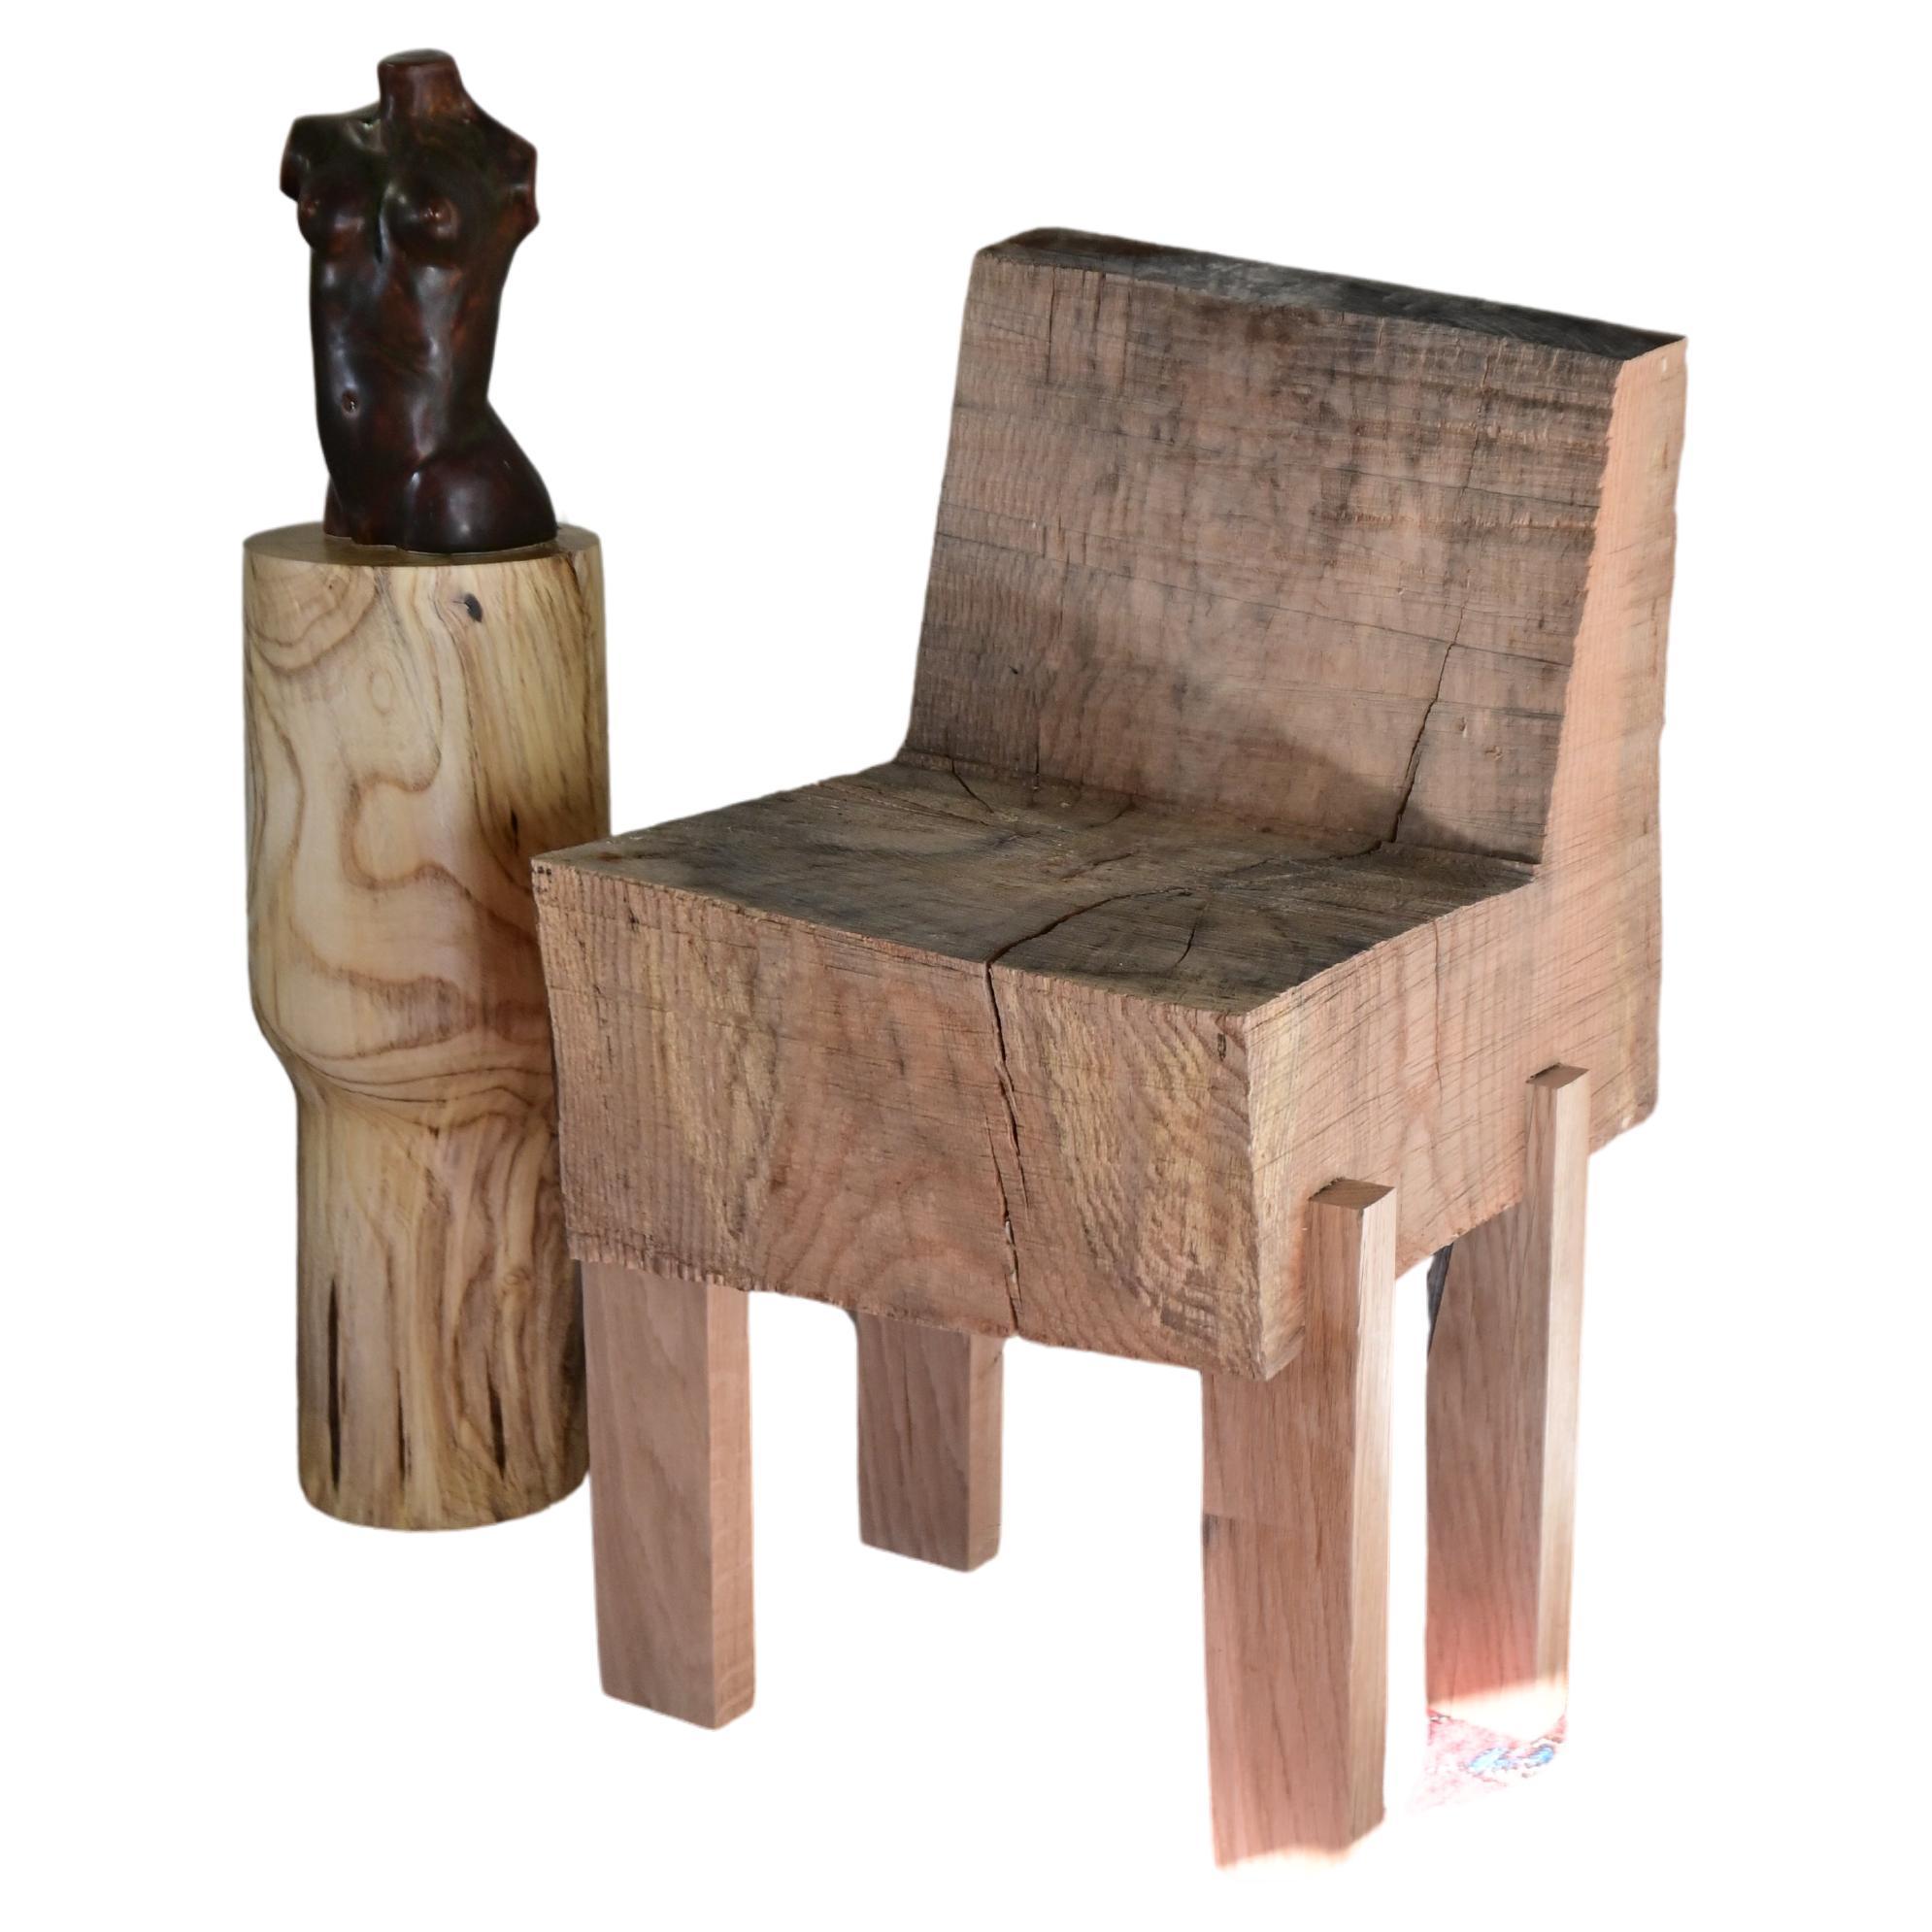 Brutalist Chainsawed Chair For Sale